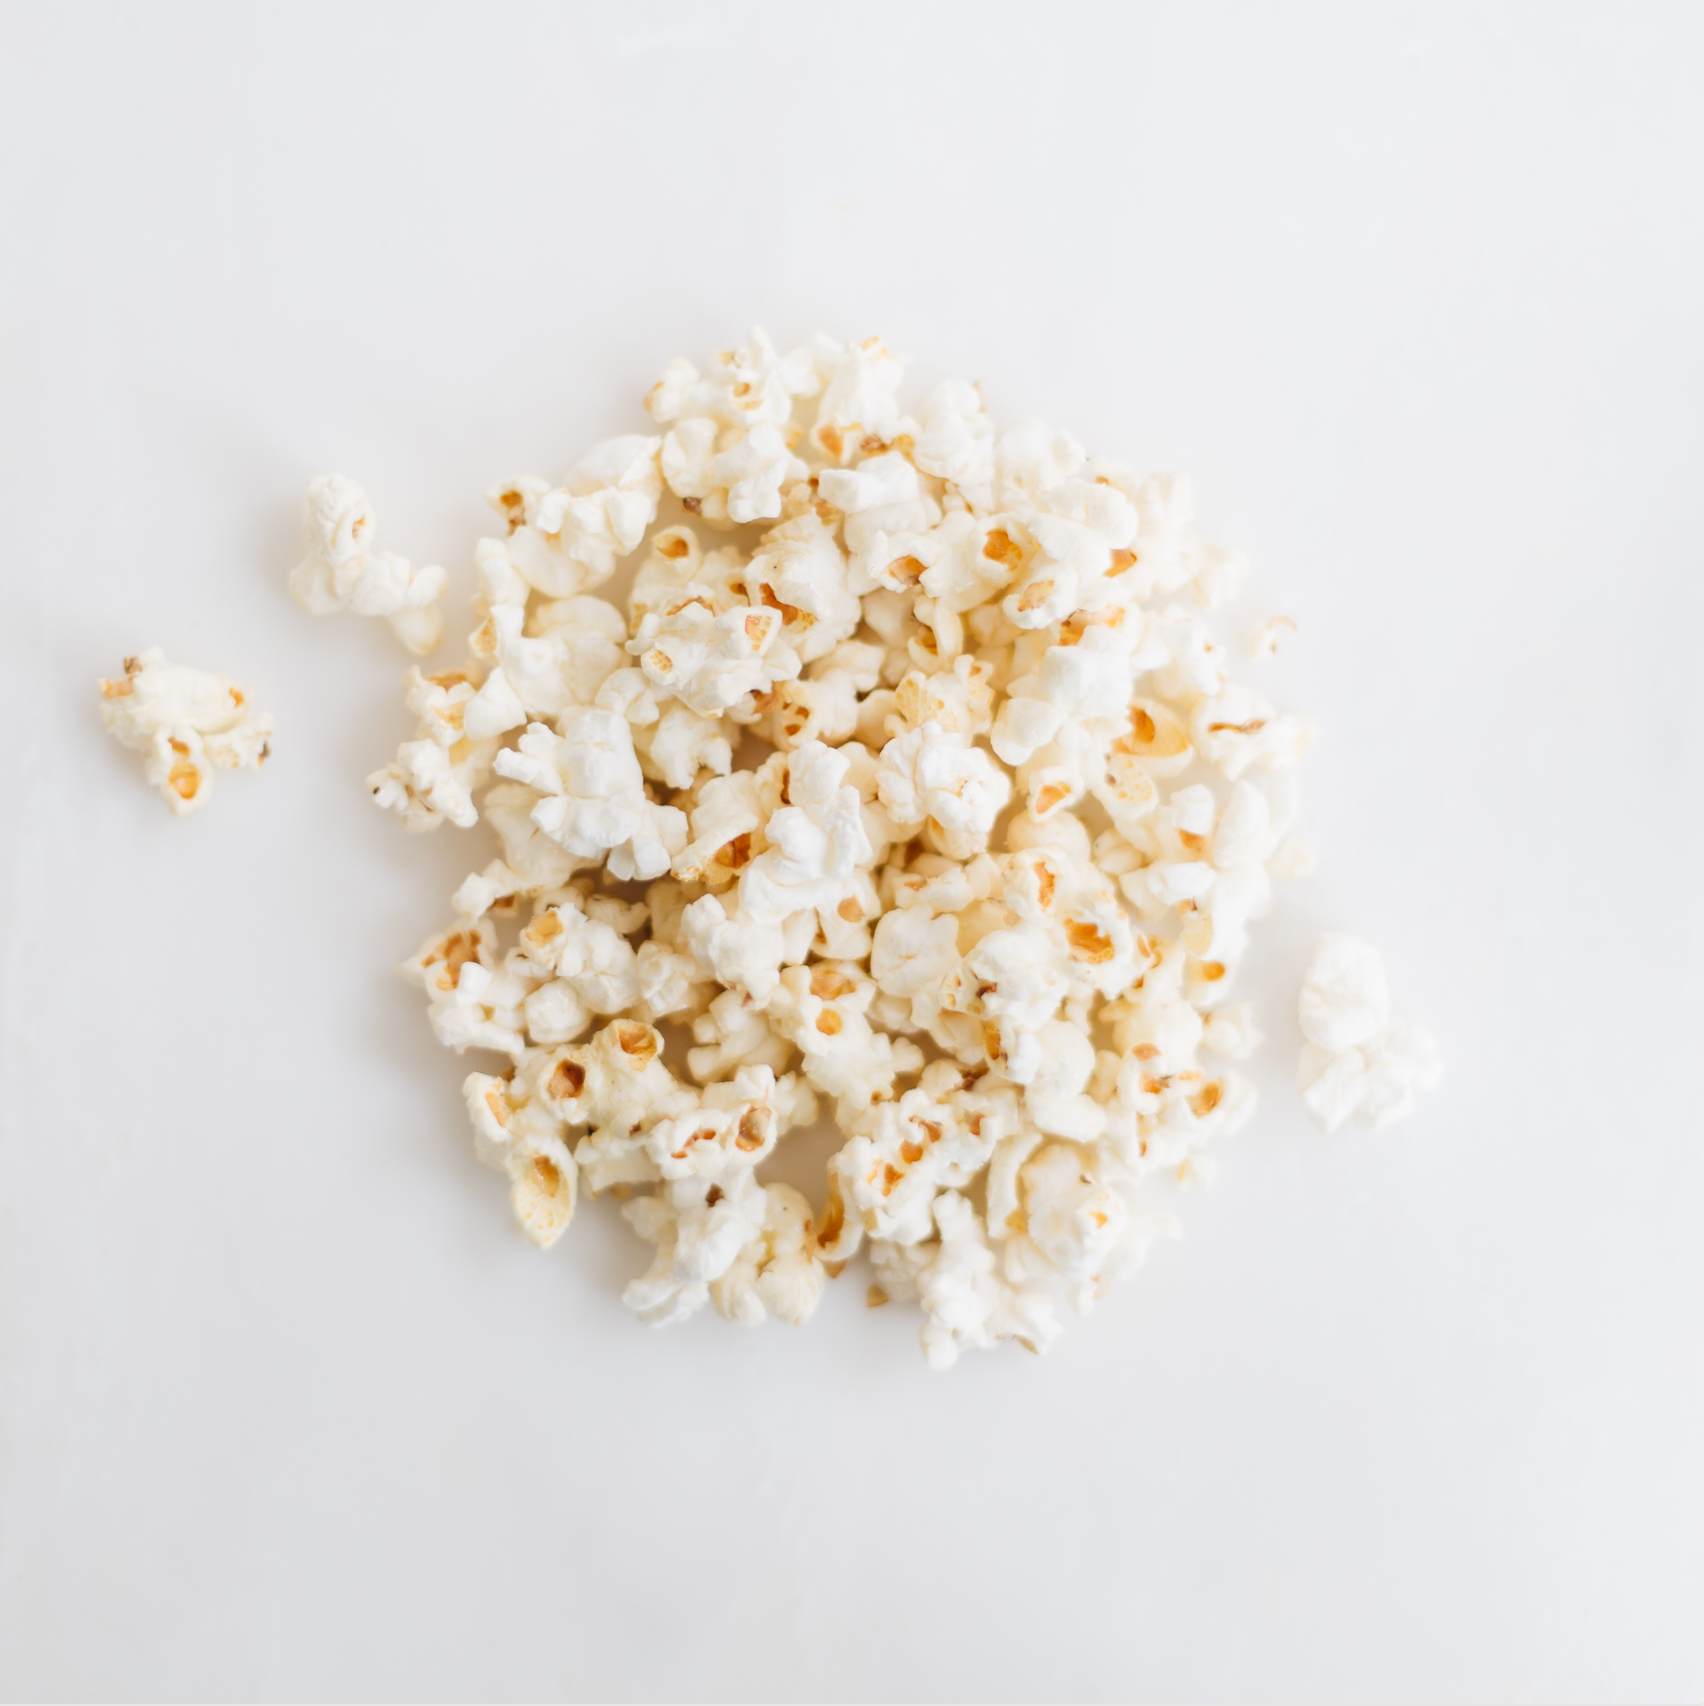 Salty, sweet, and the perfect crunch. Popnotch Goods Kettle Corn is an instant classic. Try this simple yet delicious treat. Order now online or stop in Popnotch Goods to get yourself a bag!